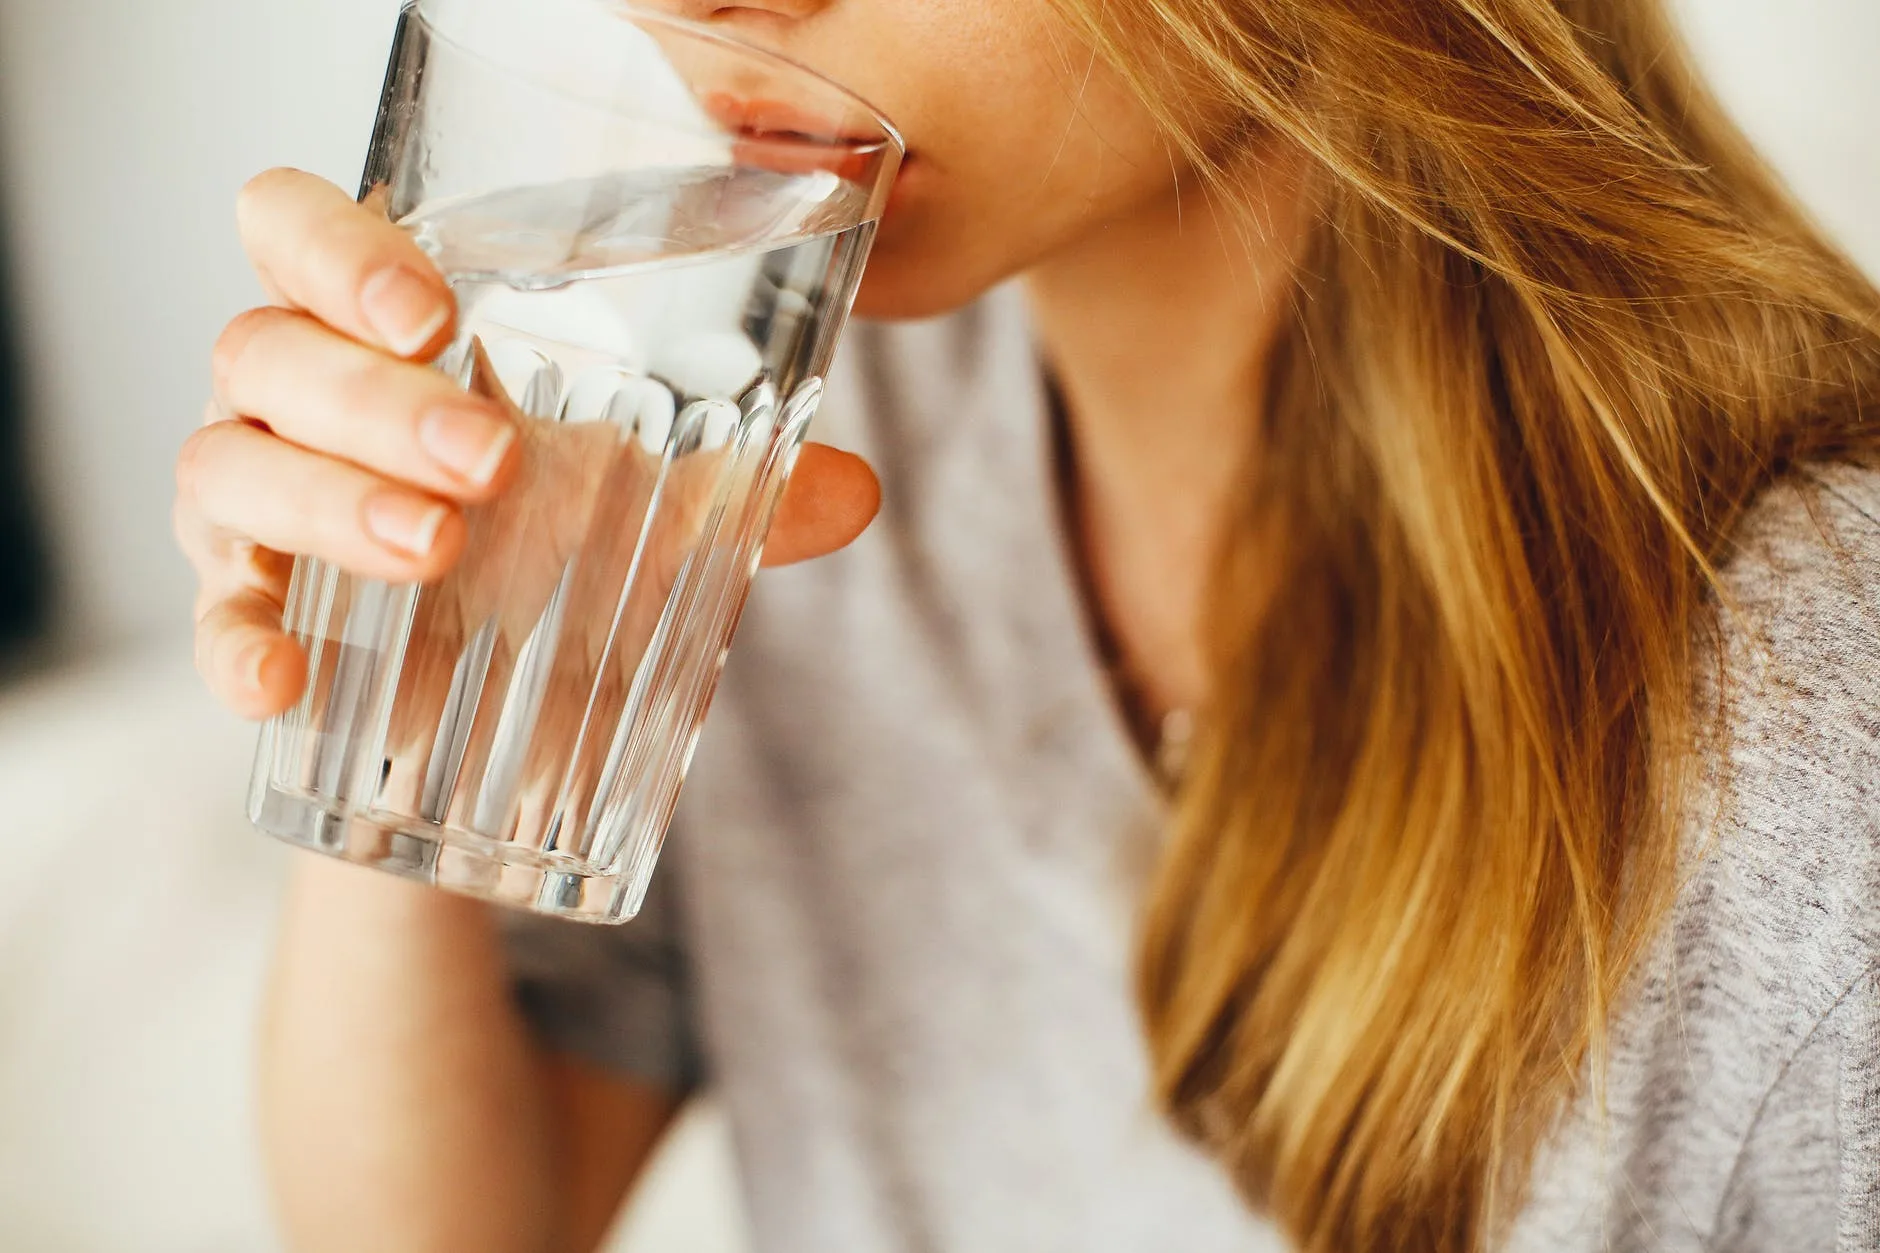 Realistically, How Much Water Do We Need To Drink For Longevity?